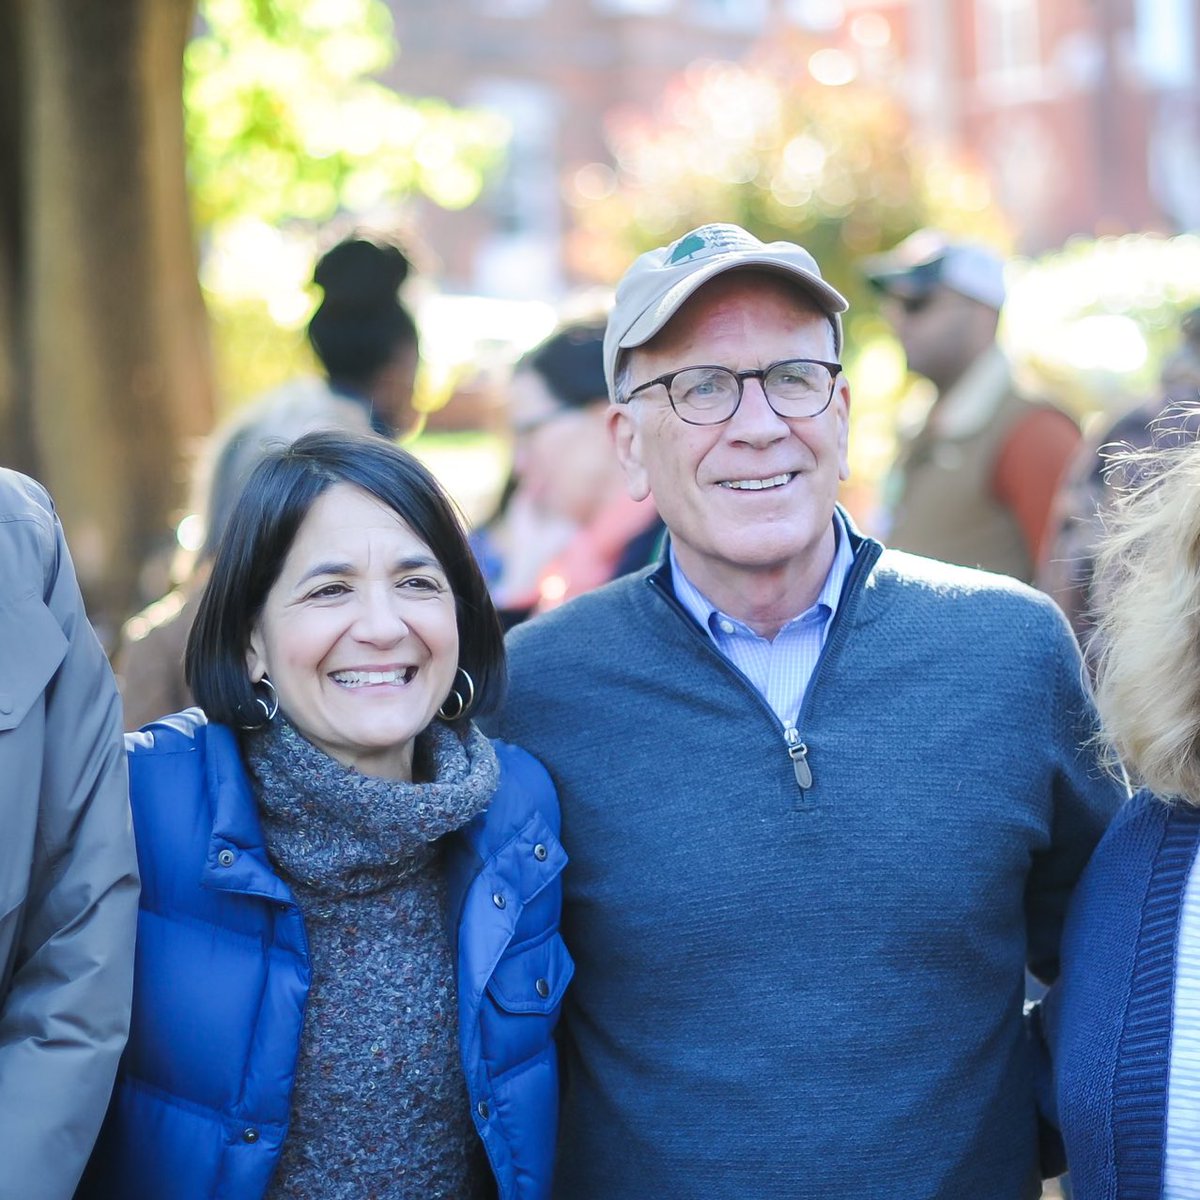 Happy birthday, @WelchForVT! Grateful for your leadership as we fight to make life better for Vermonters.